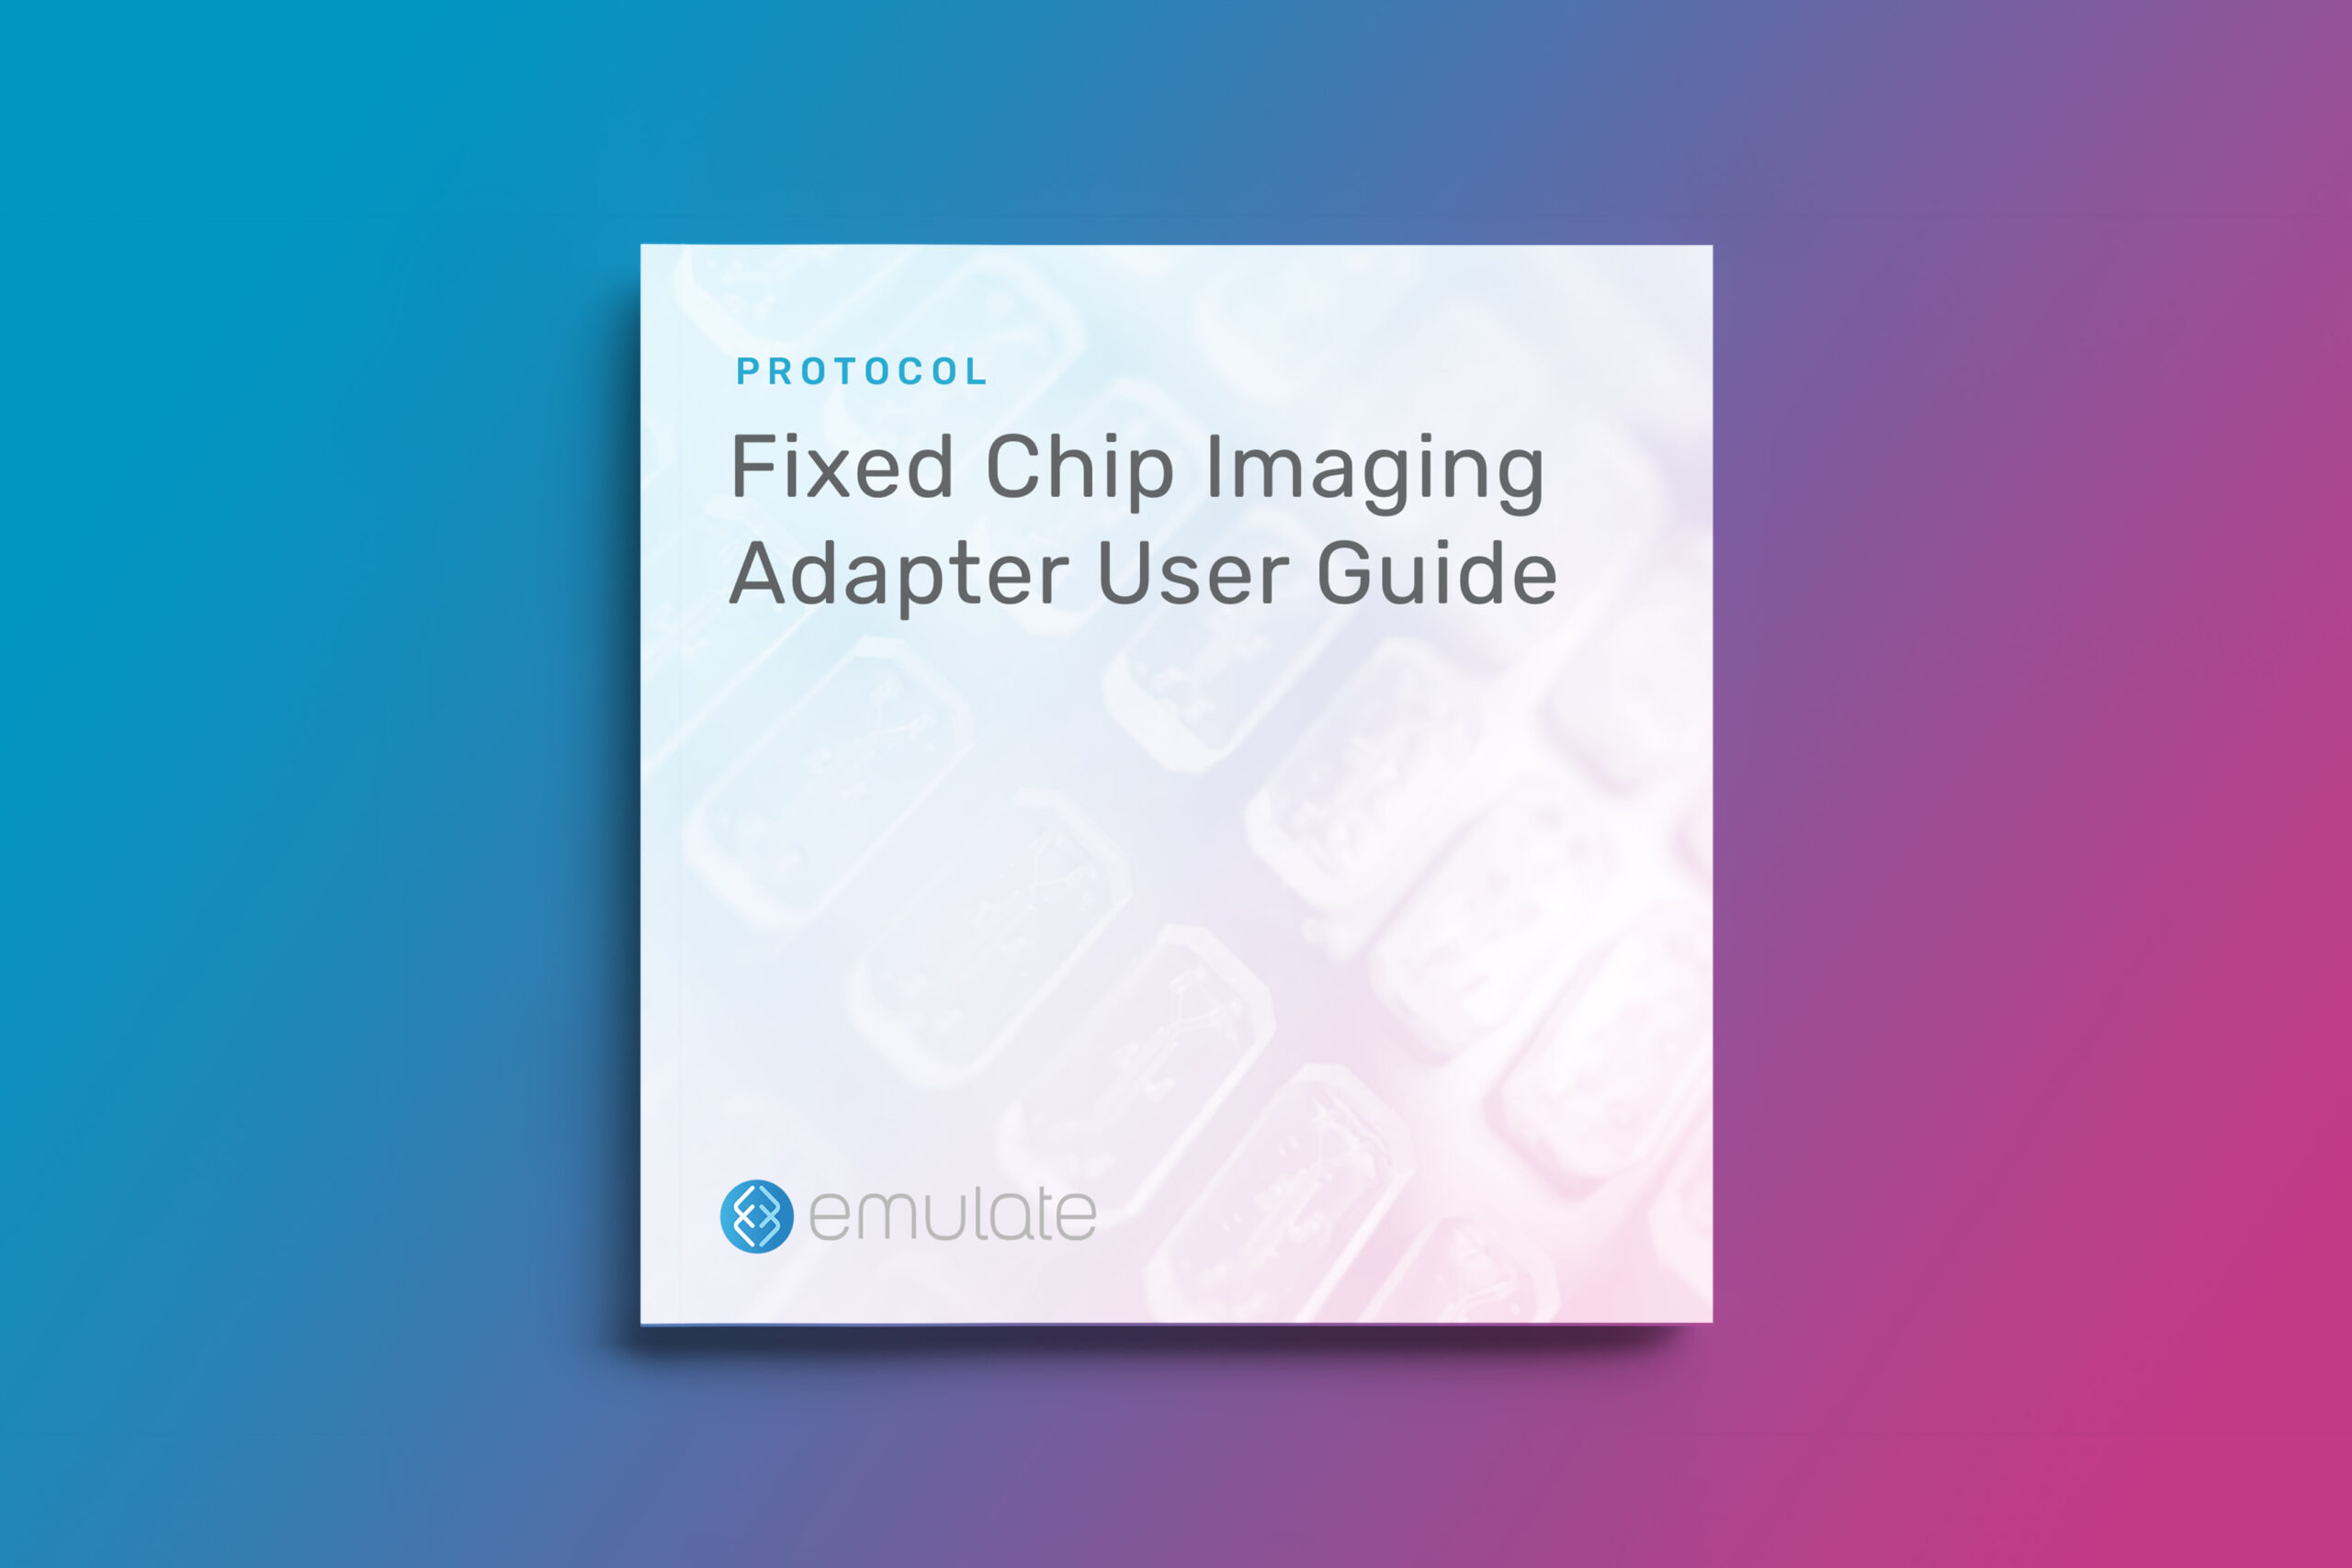 Fixed Chip Imaging Adapter User Guide